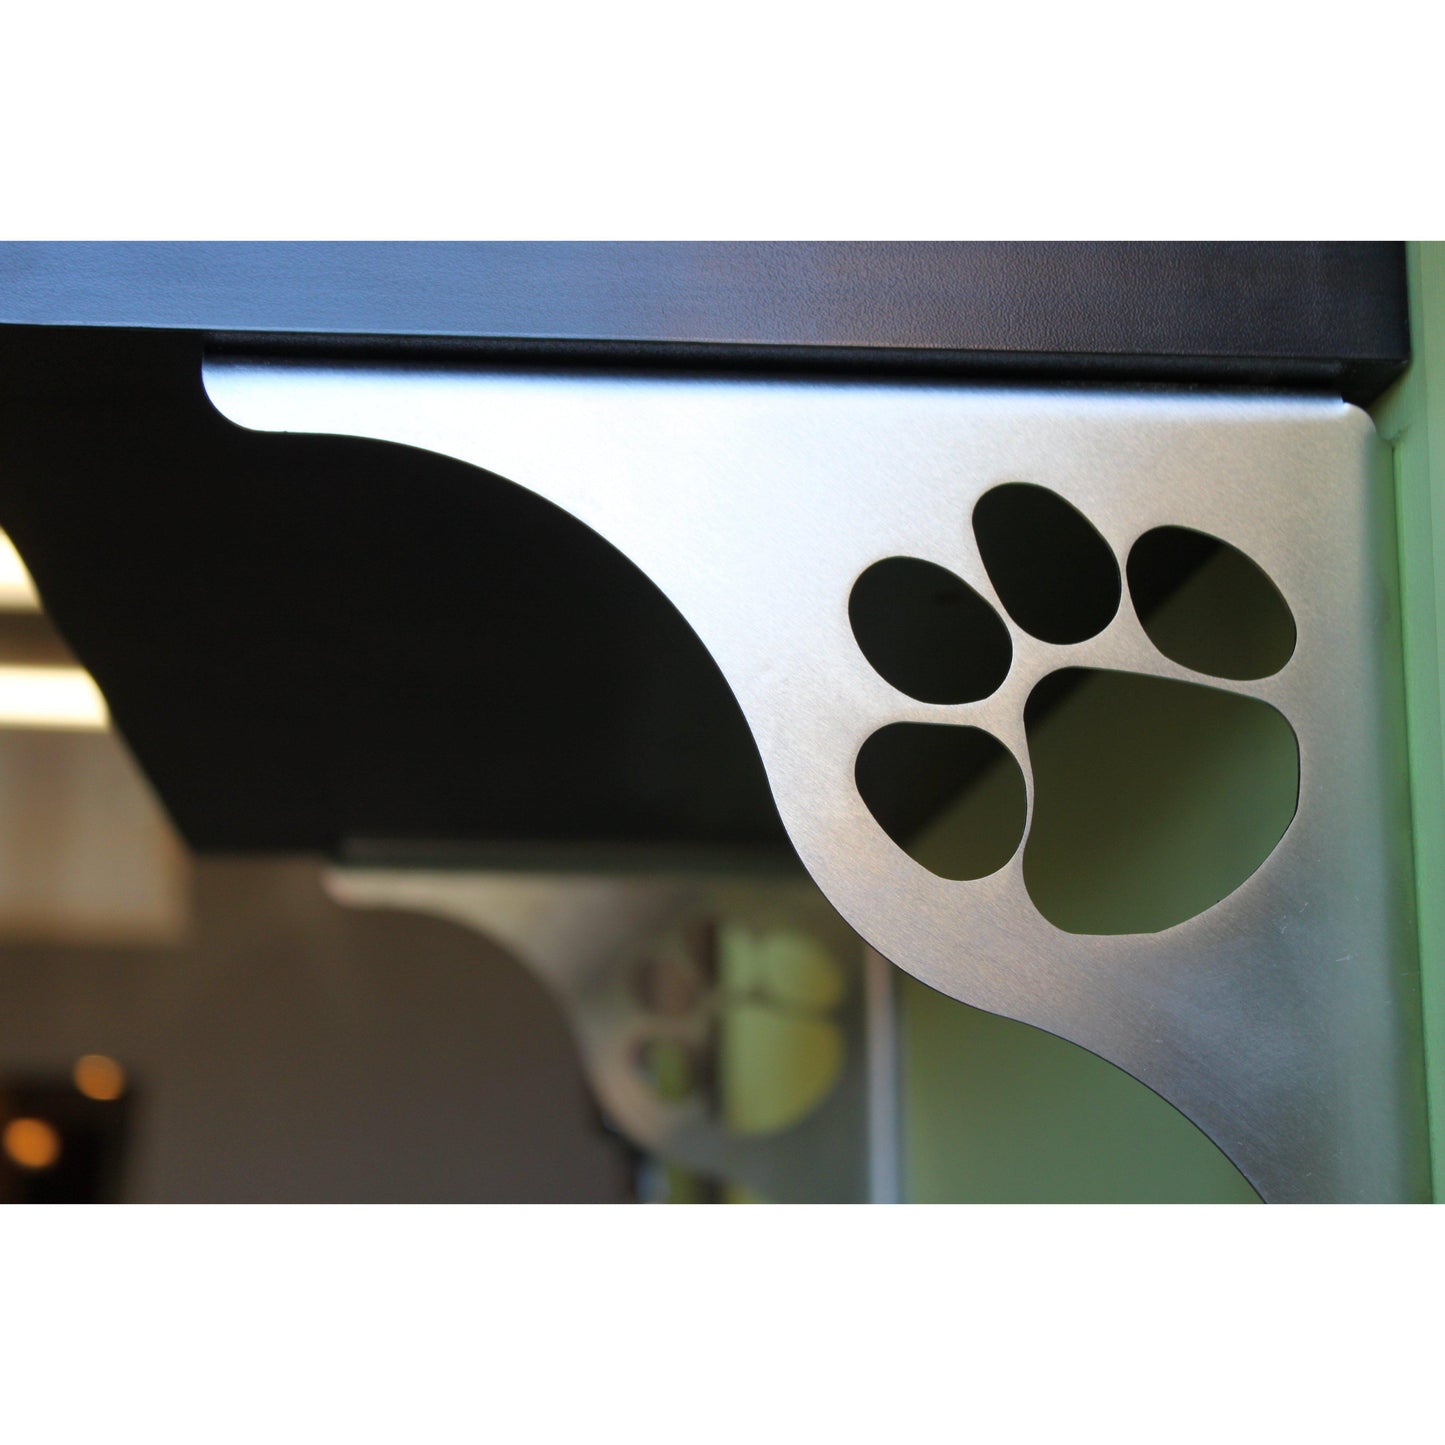 Dog Paw Stainless Steel Shelf Bracket -Paws for Cause